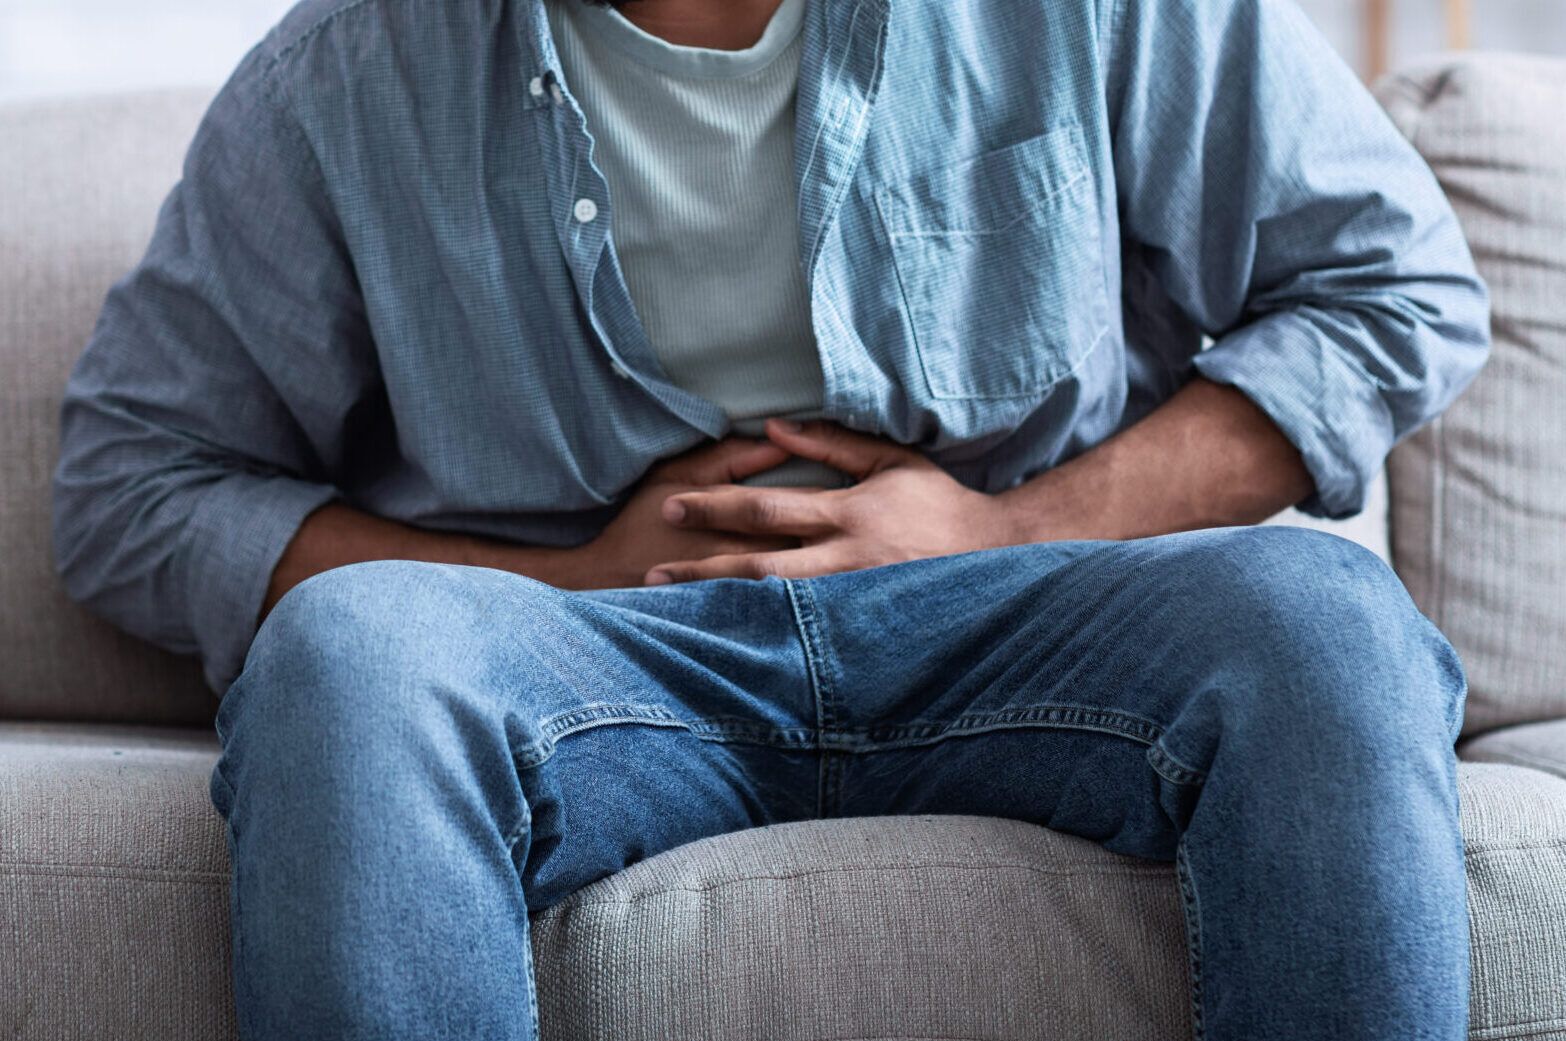 MAN WITH IBS and stomachache